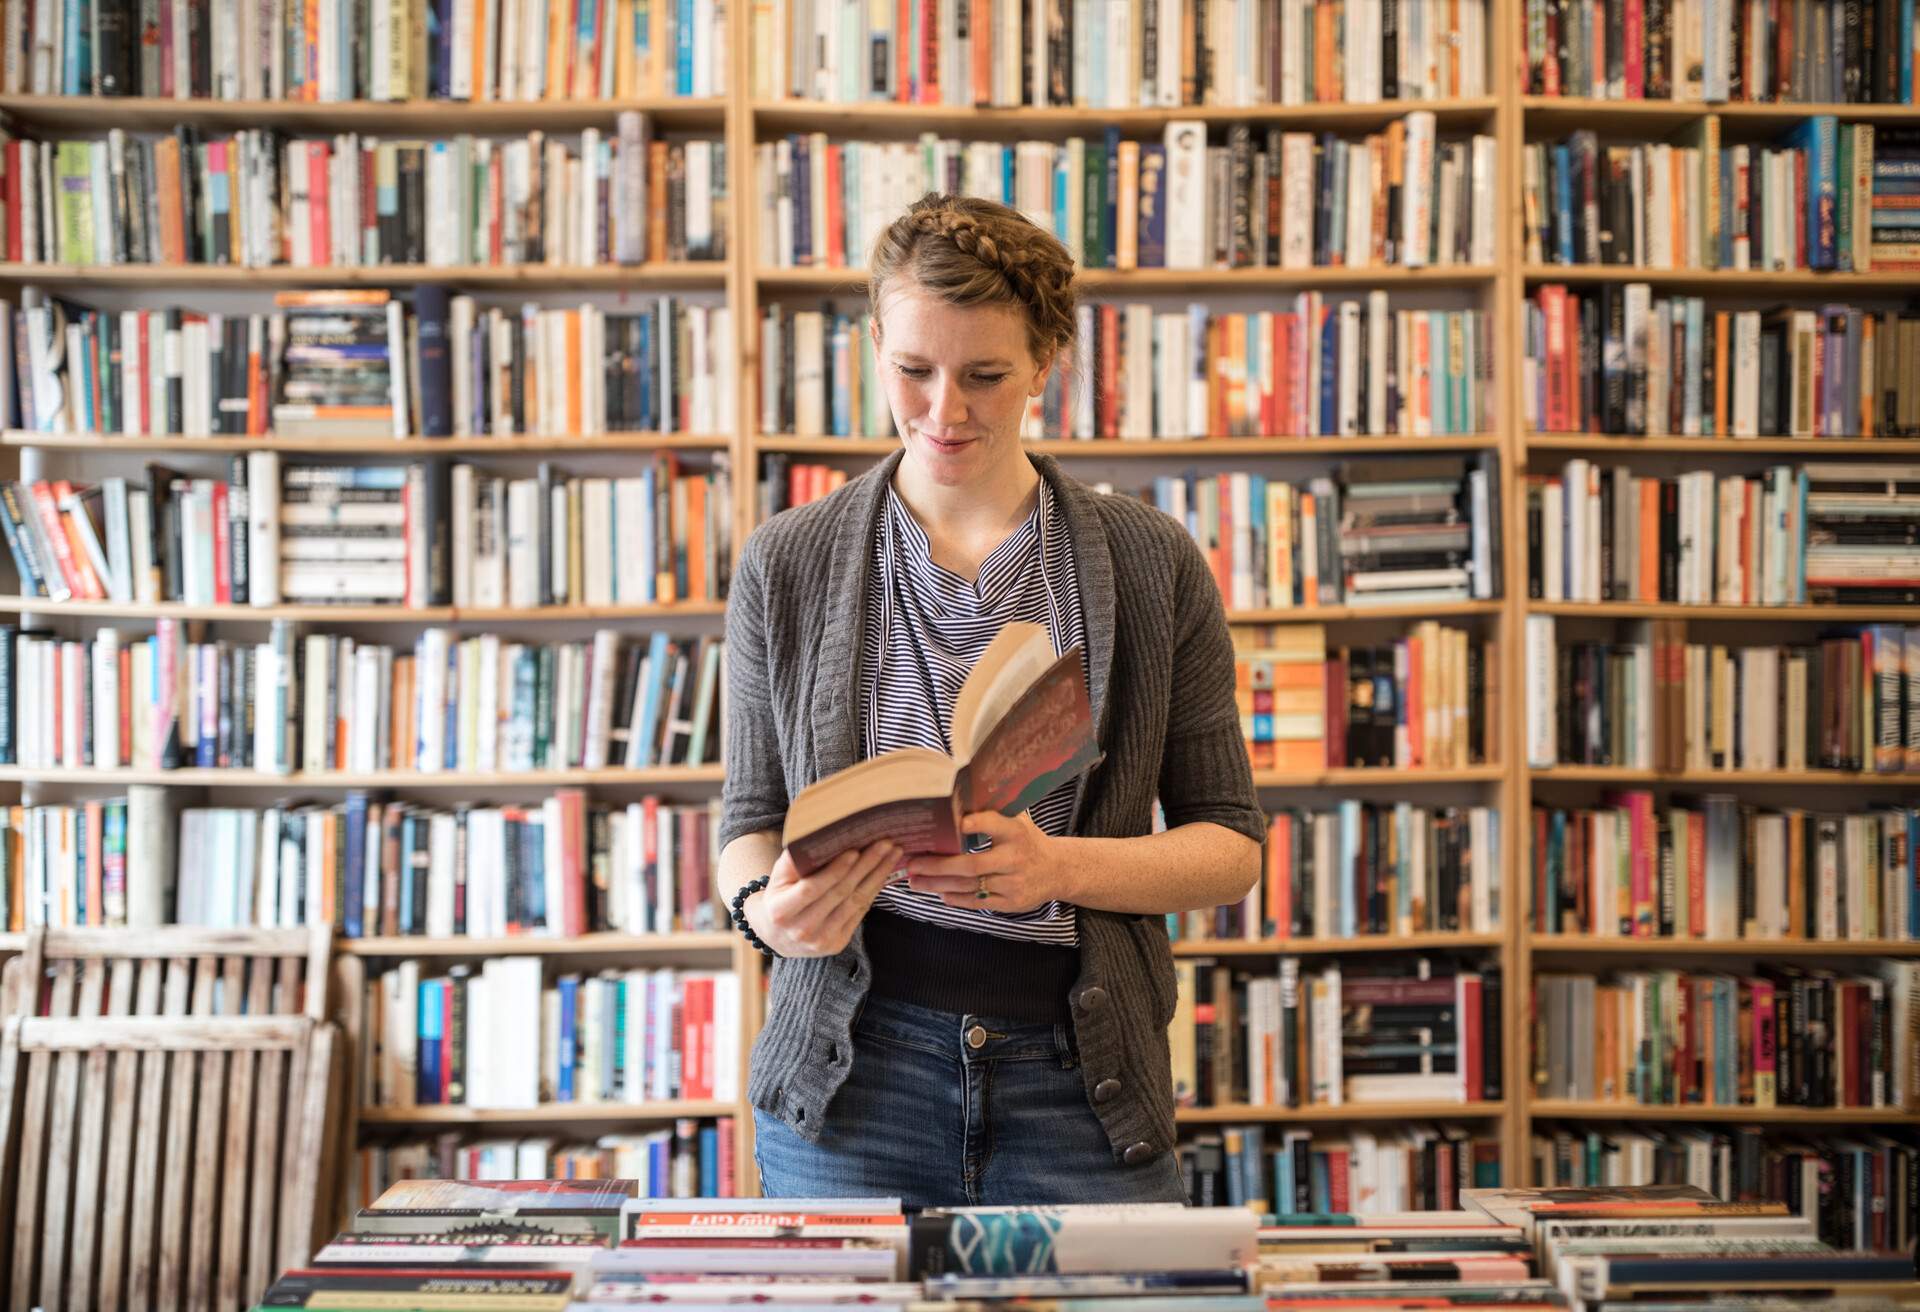 Woman reads a book while standing against bookshelf in bookstore.